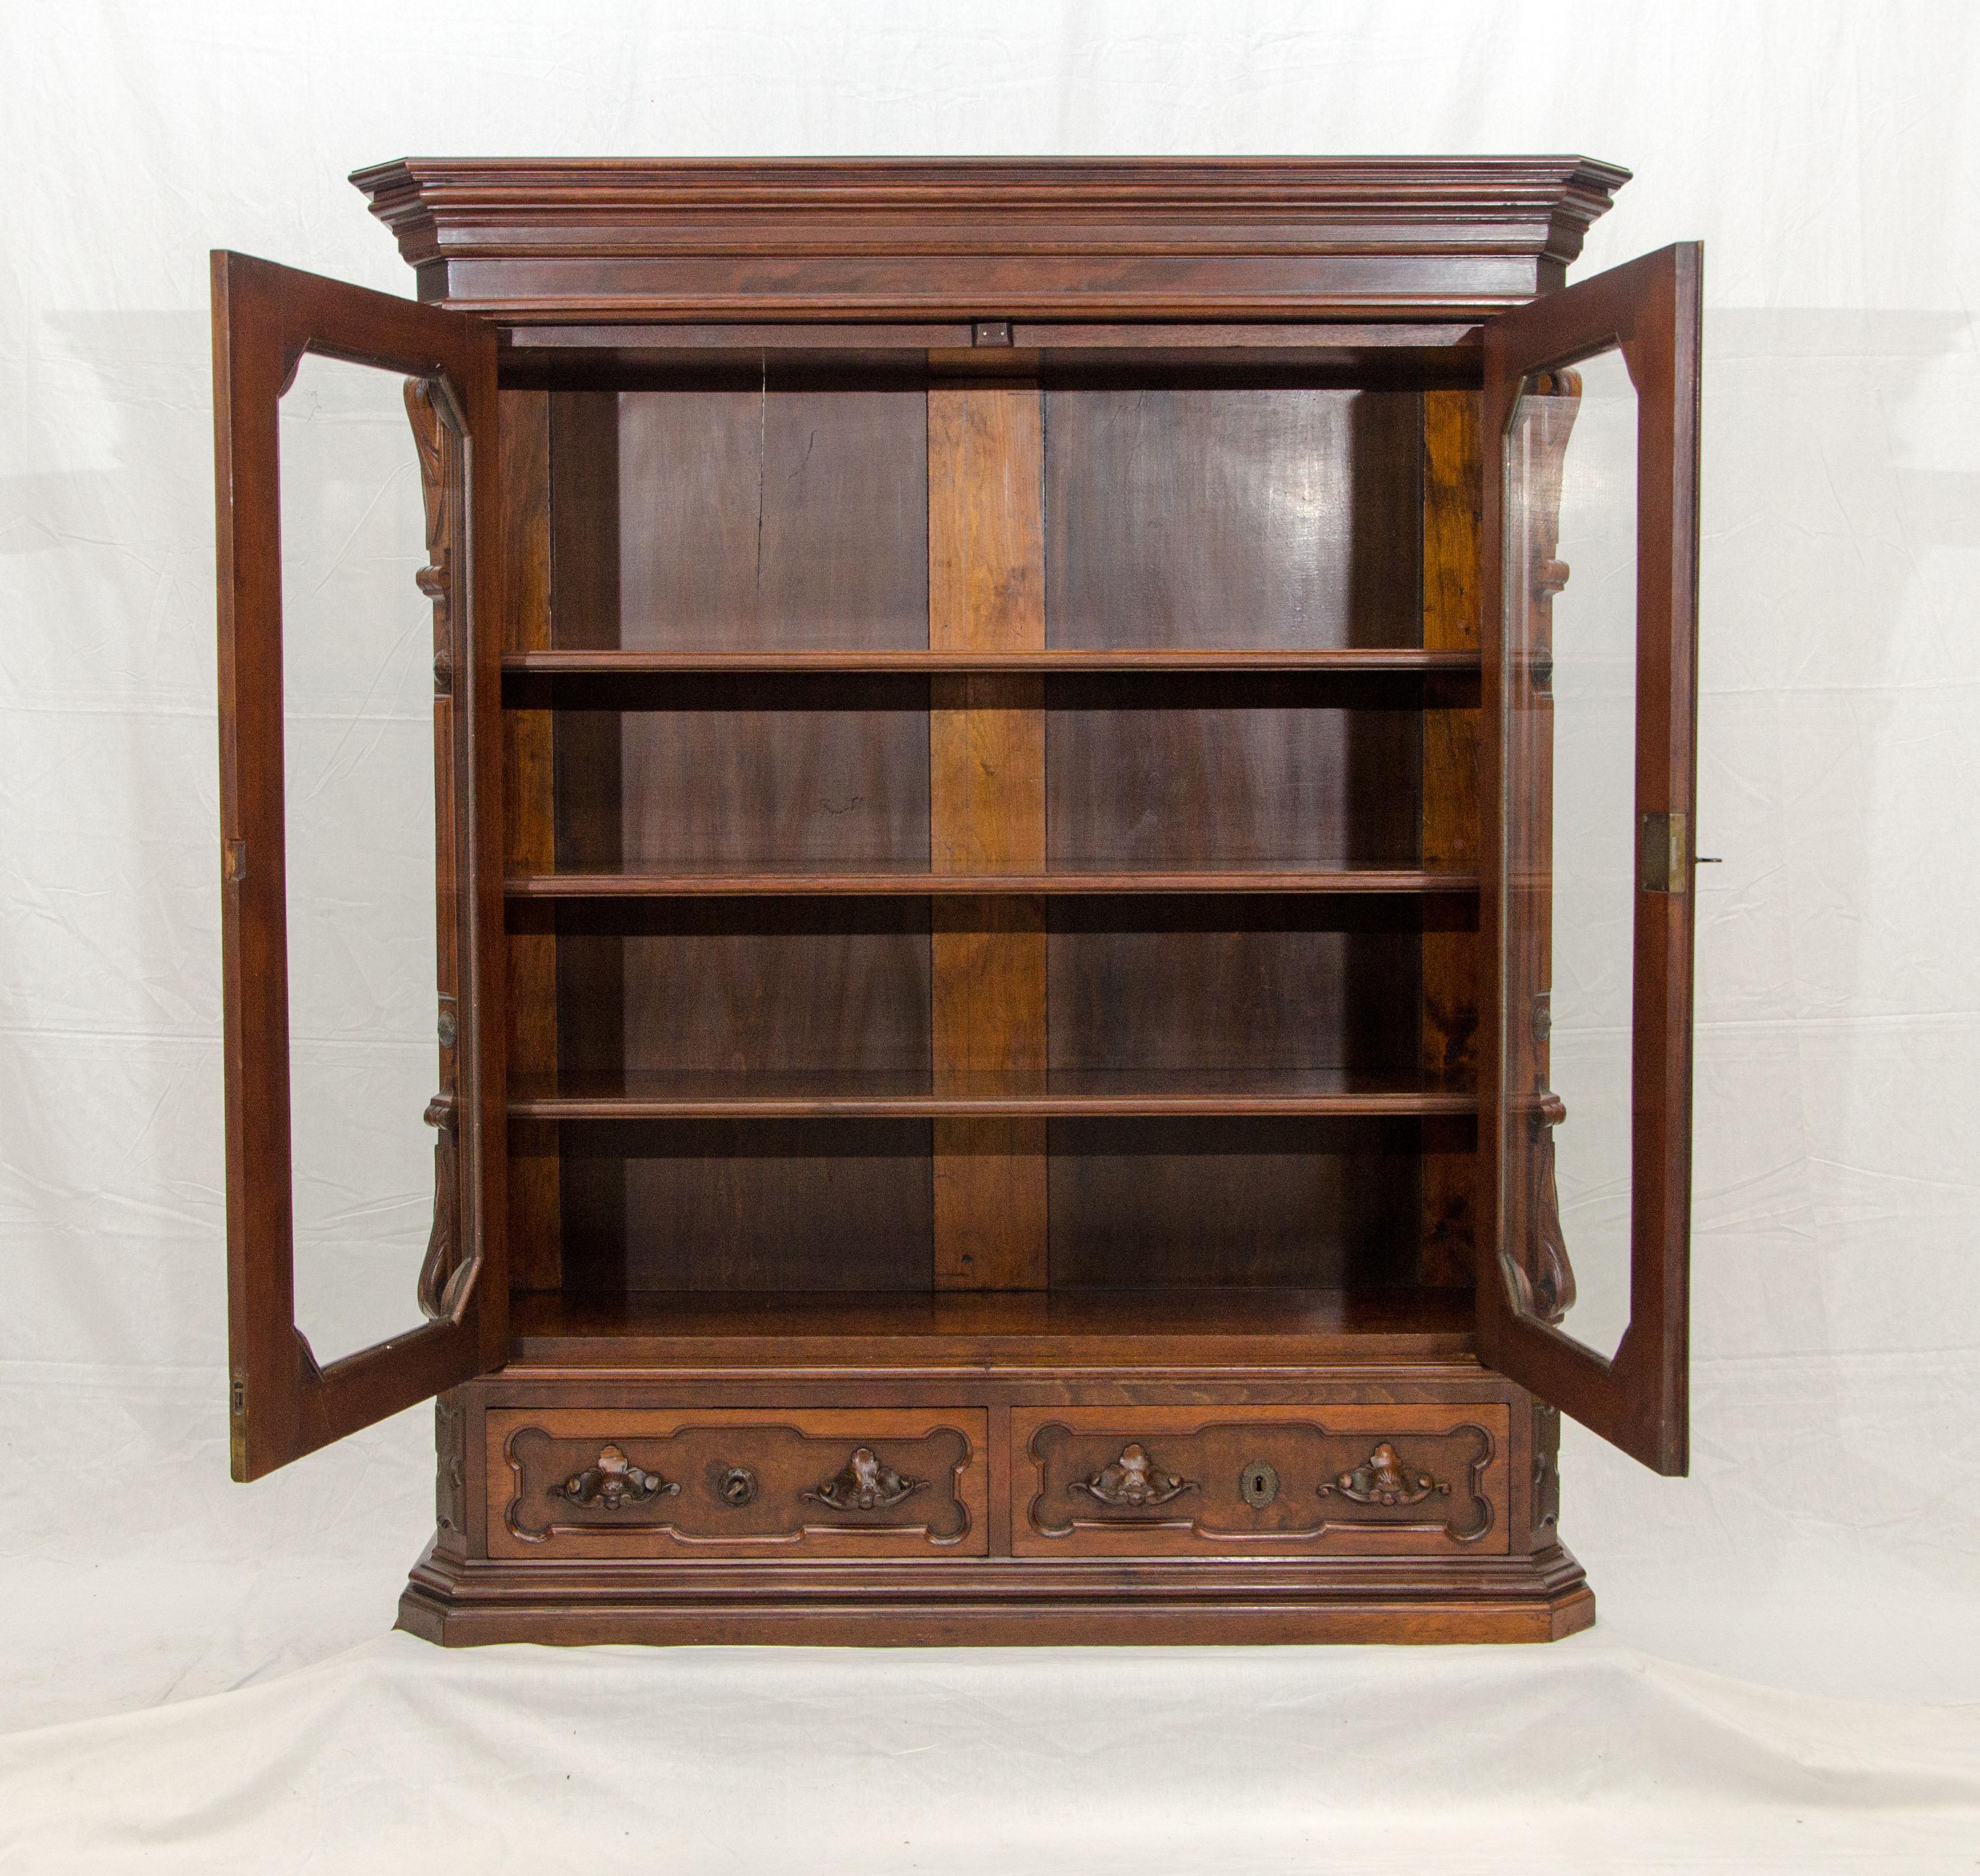 Very nice late 1800s American Victorian bookcase with two glass front doors and two storage drawers below. The inside height of the drawers is 5